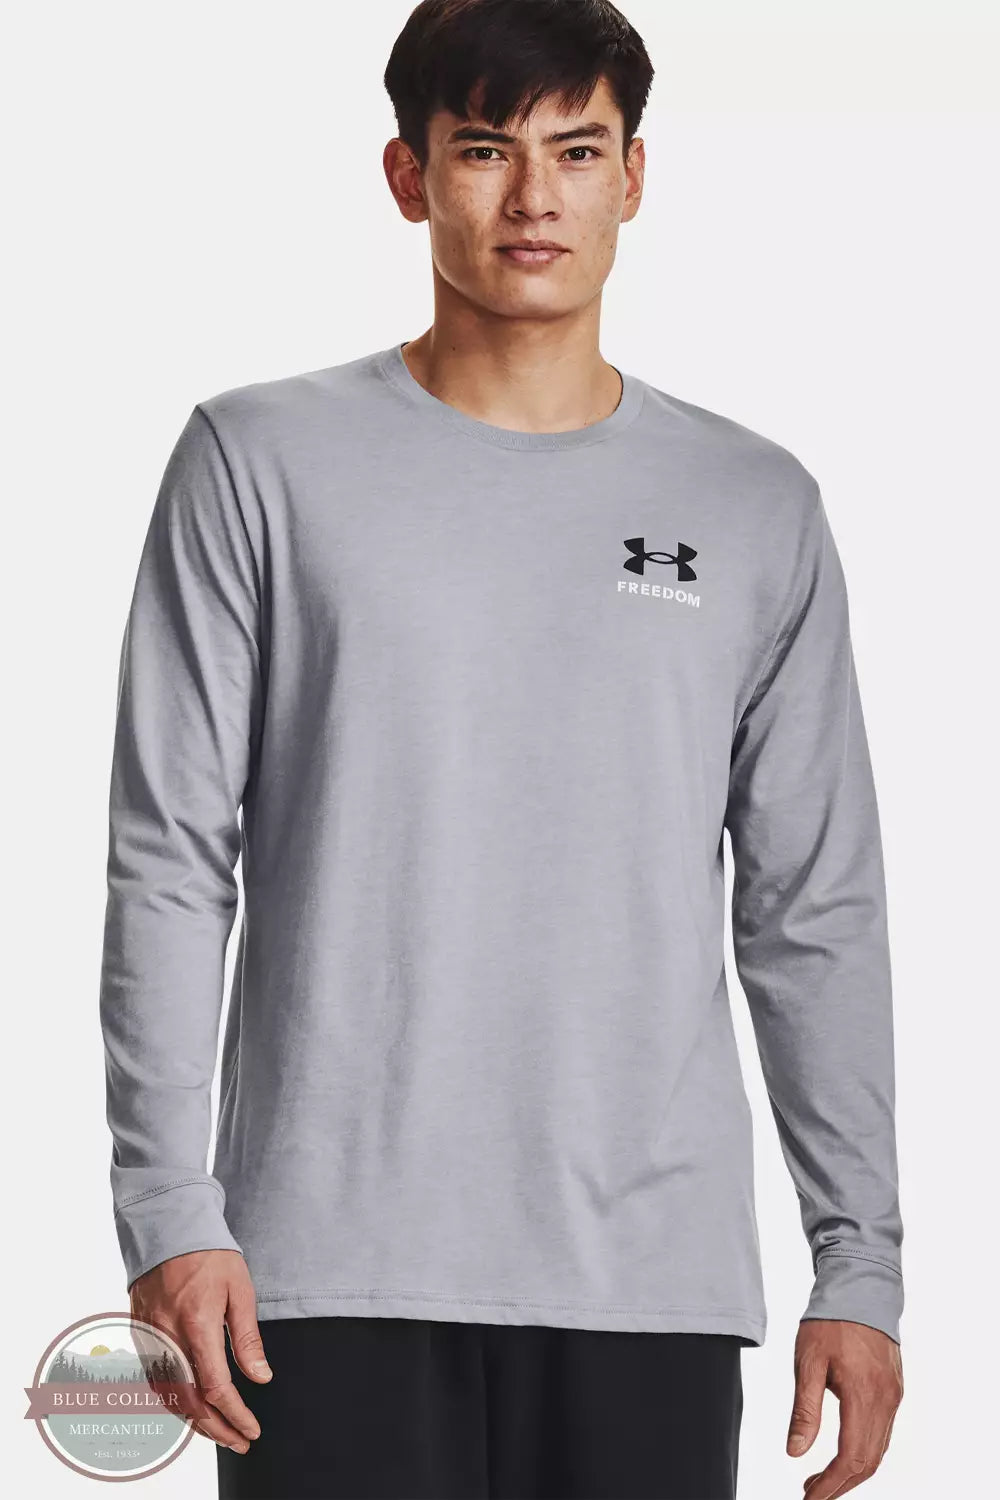 Under Armour 1370813 Freedom Flag Long Sleeve T-Shirt Steel Medium Heather Front View